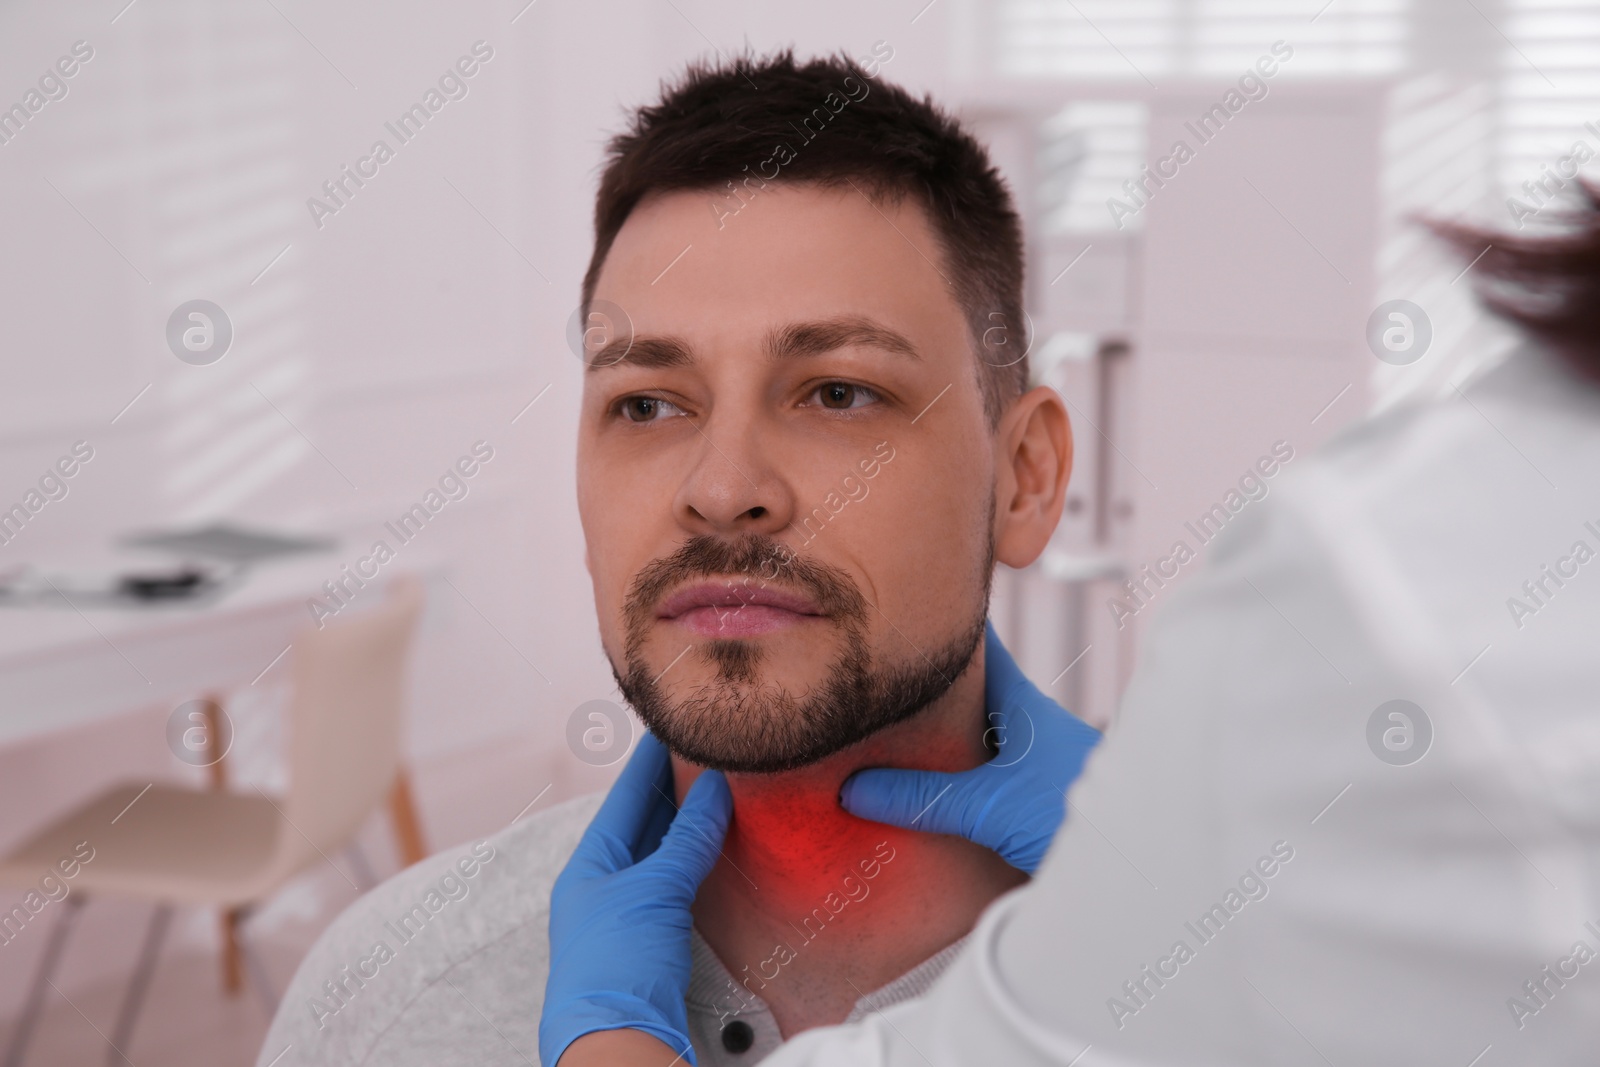 Image of Endocrine system. Doctor examining patient's thyroid gland in hospital